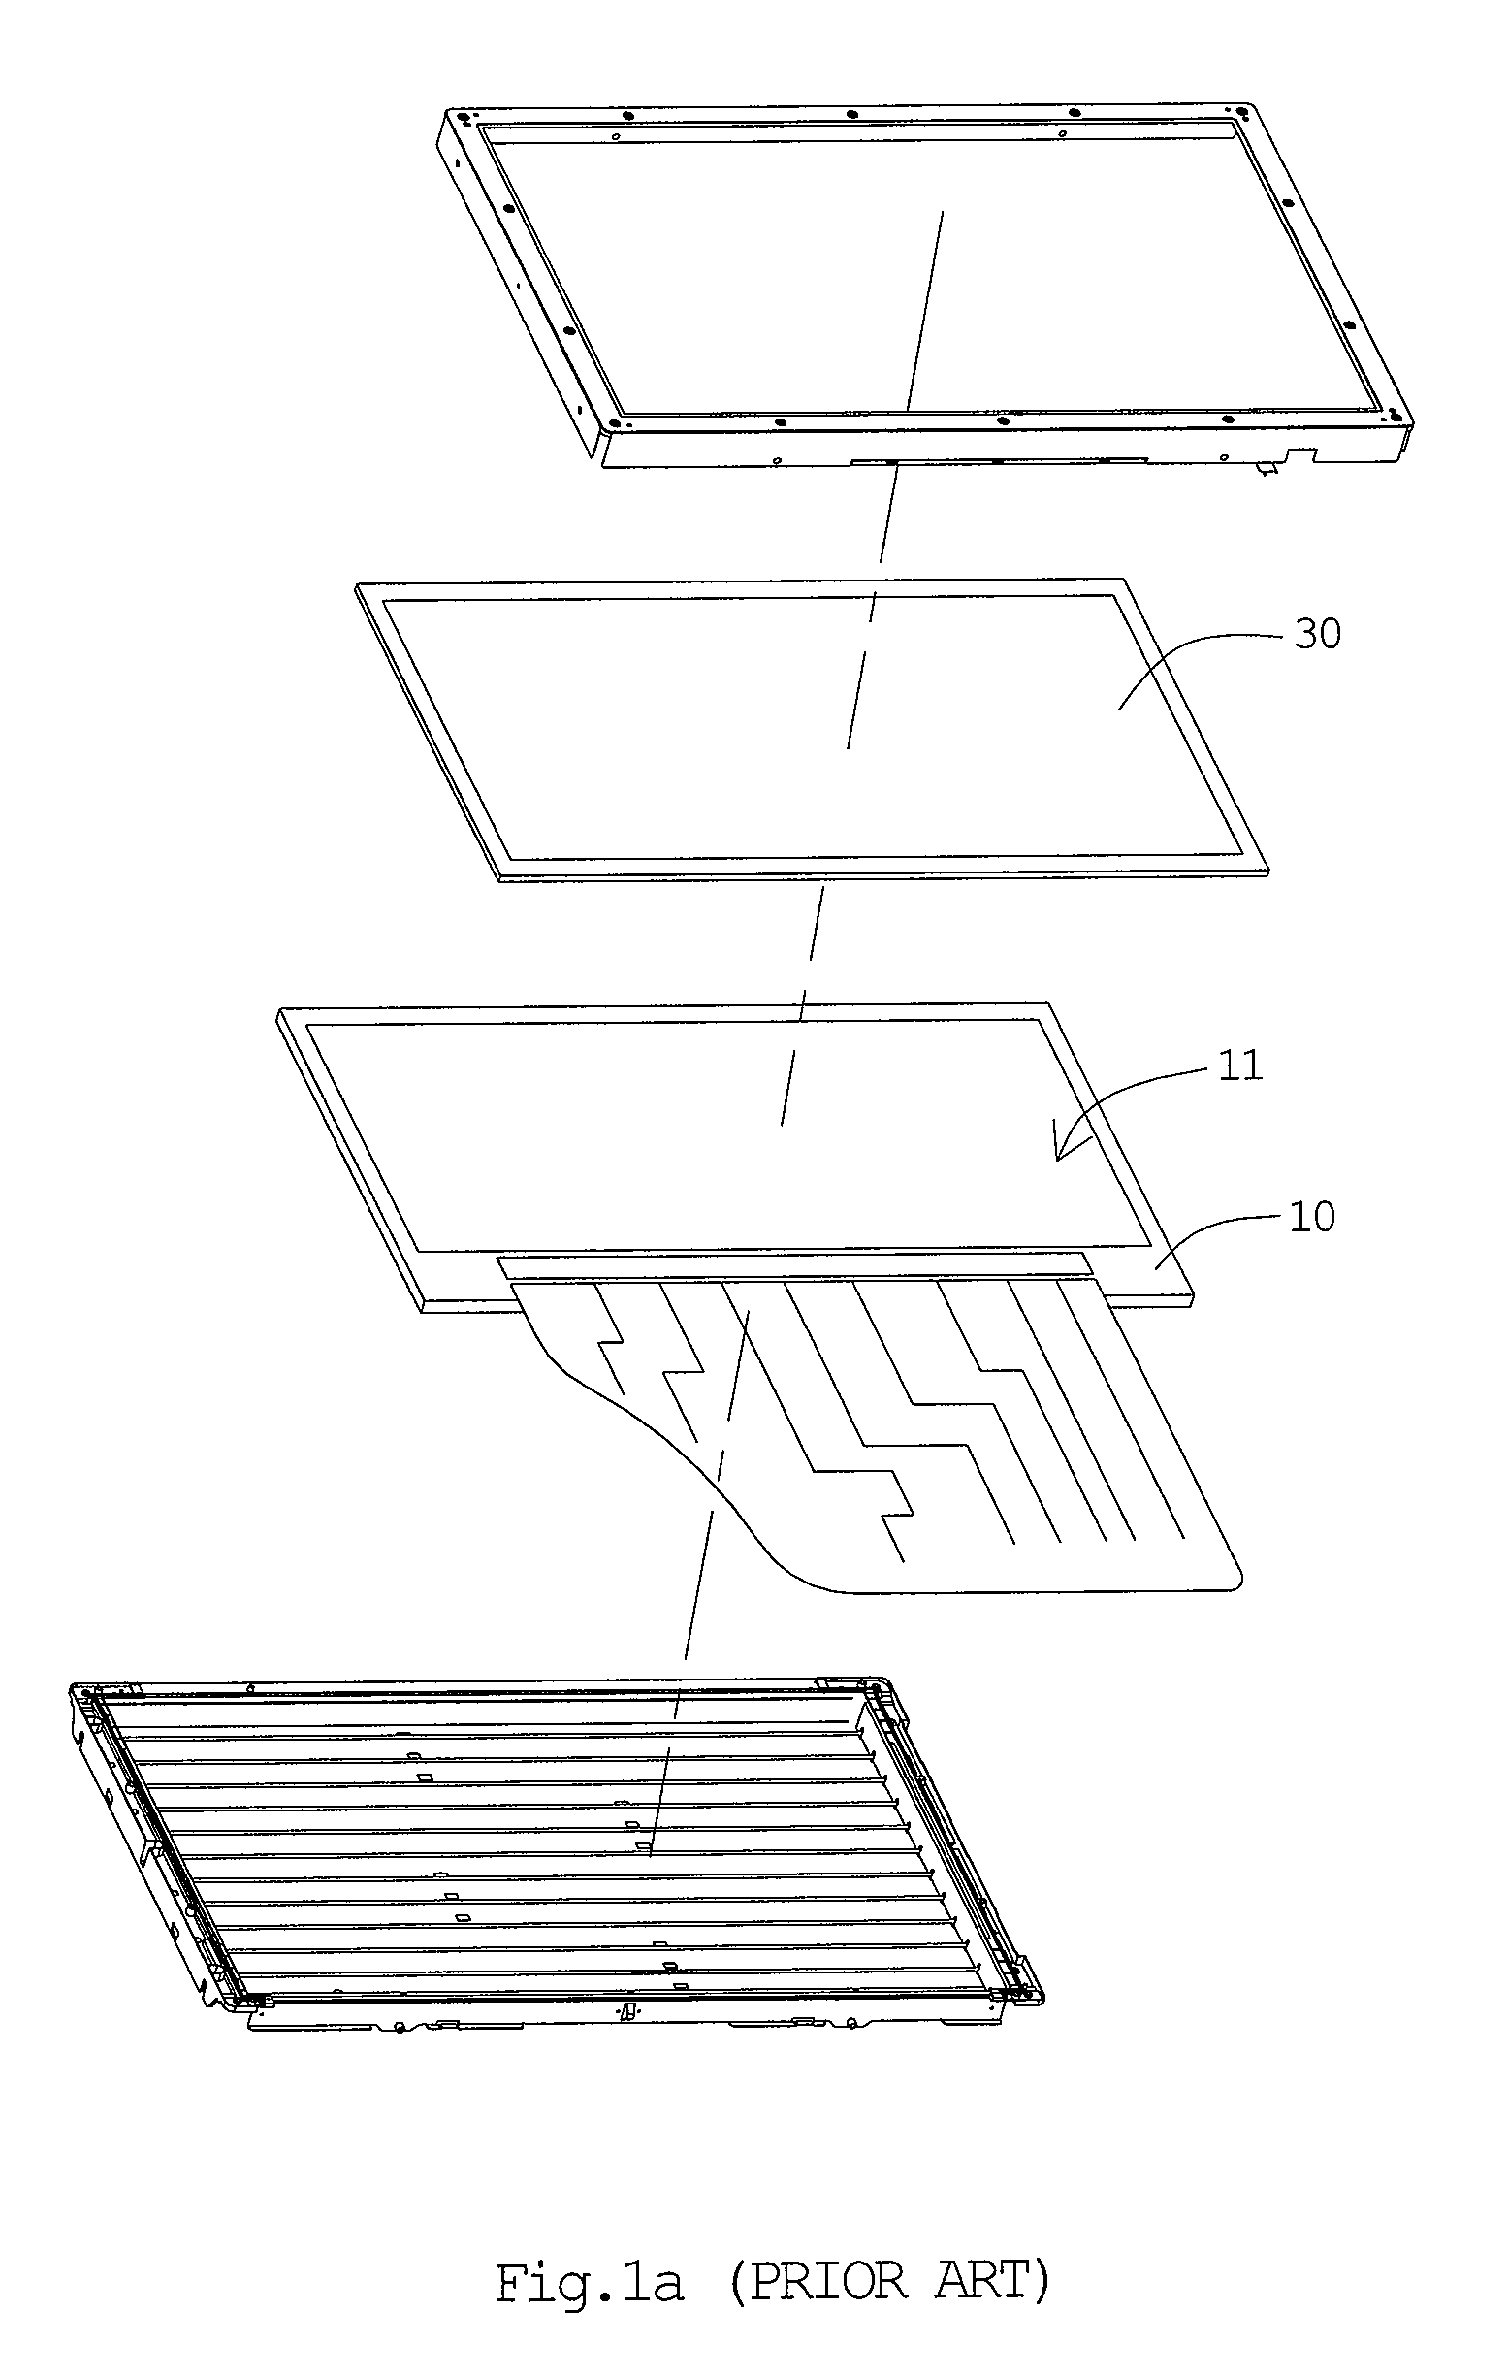 Capacitive Touch Panel with Low Coupling Capacitance and Display Device Using the Capacitive Touch Panel